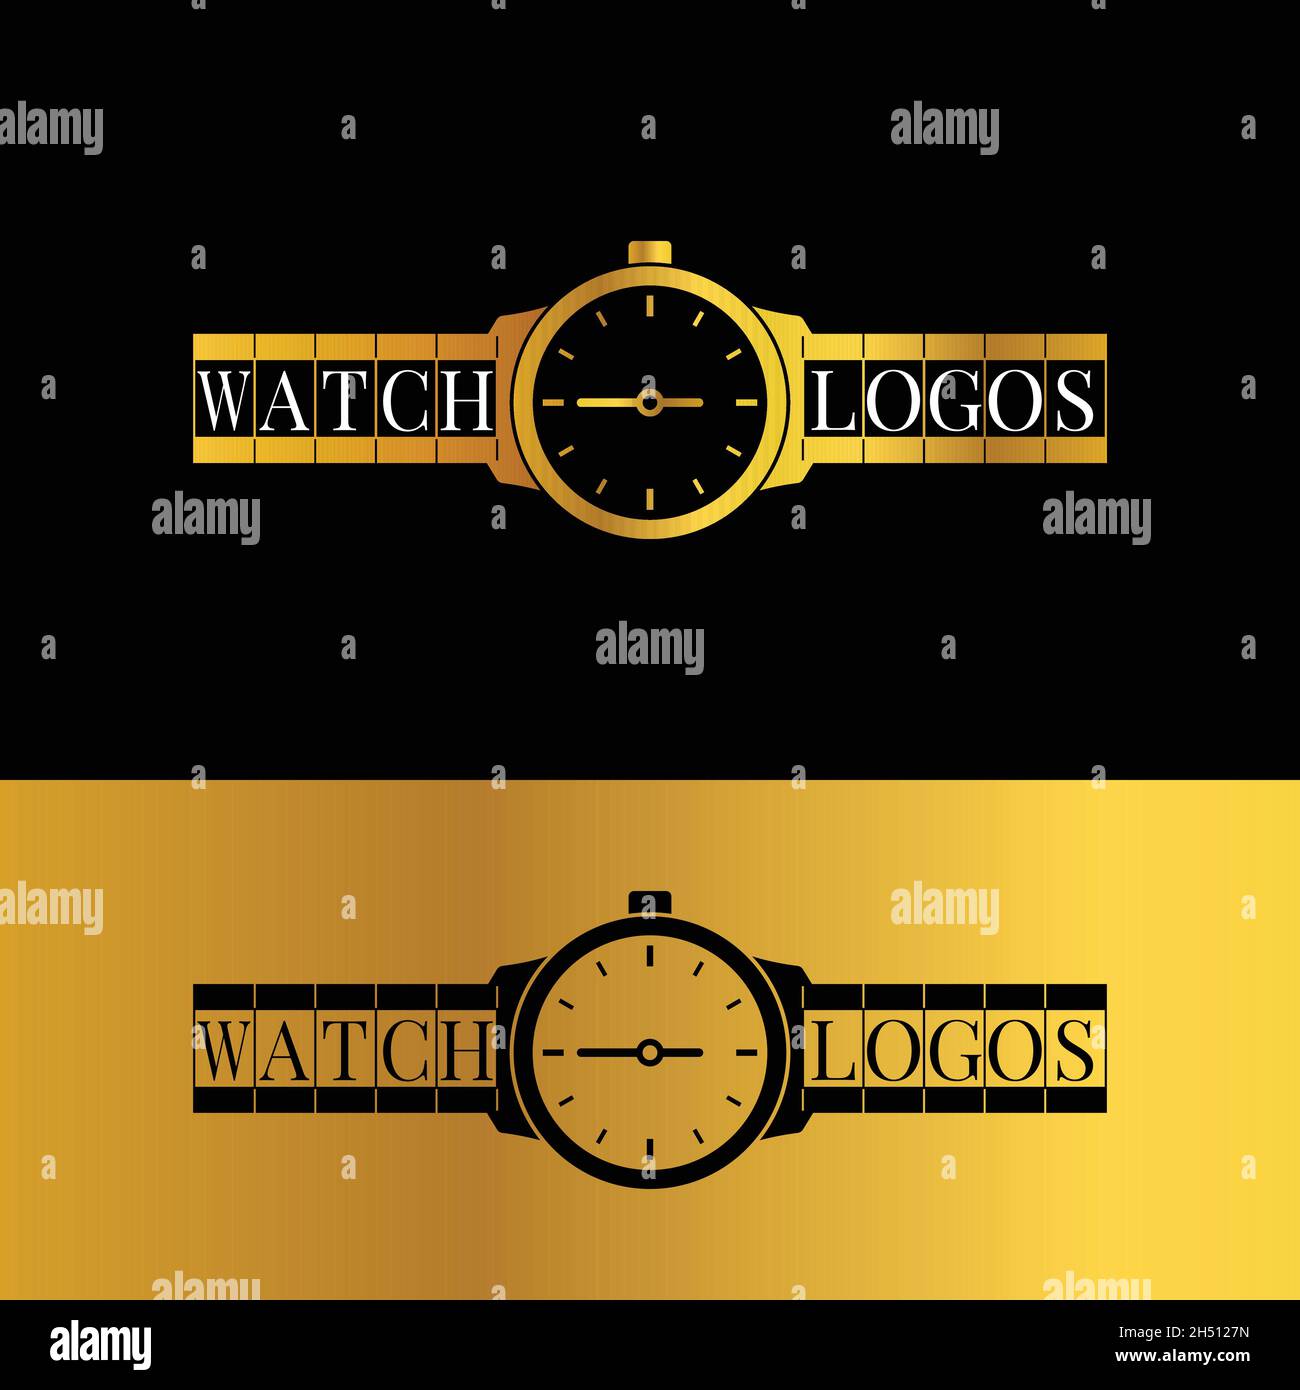 Watch Brand Logo designs, themes, templates and downloadable